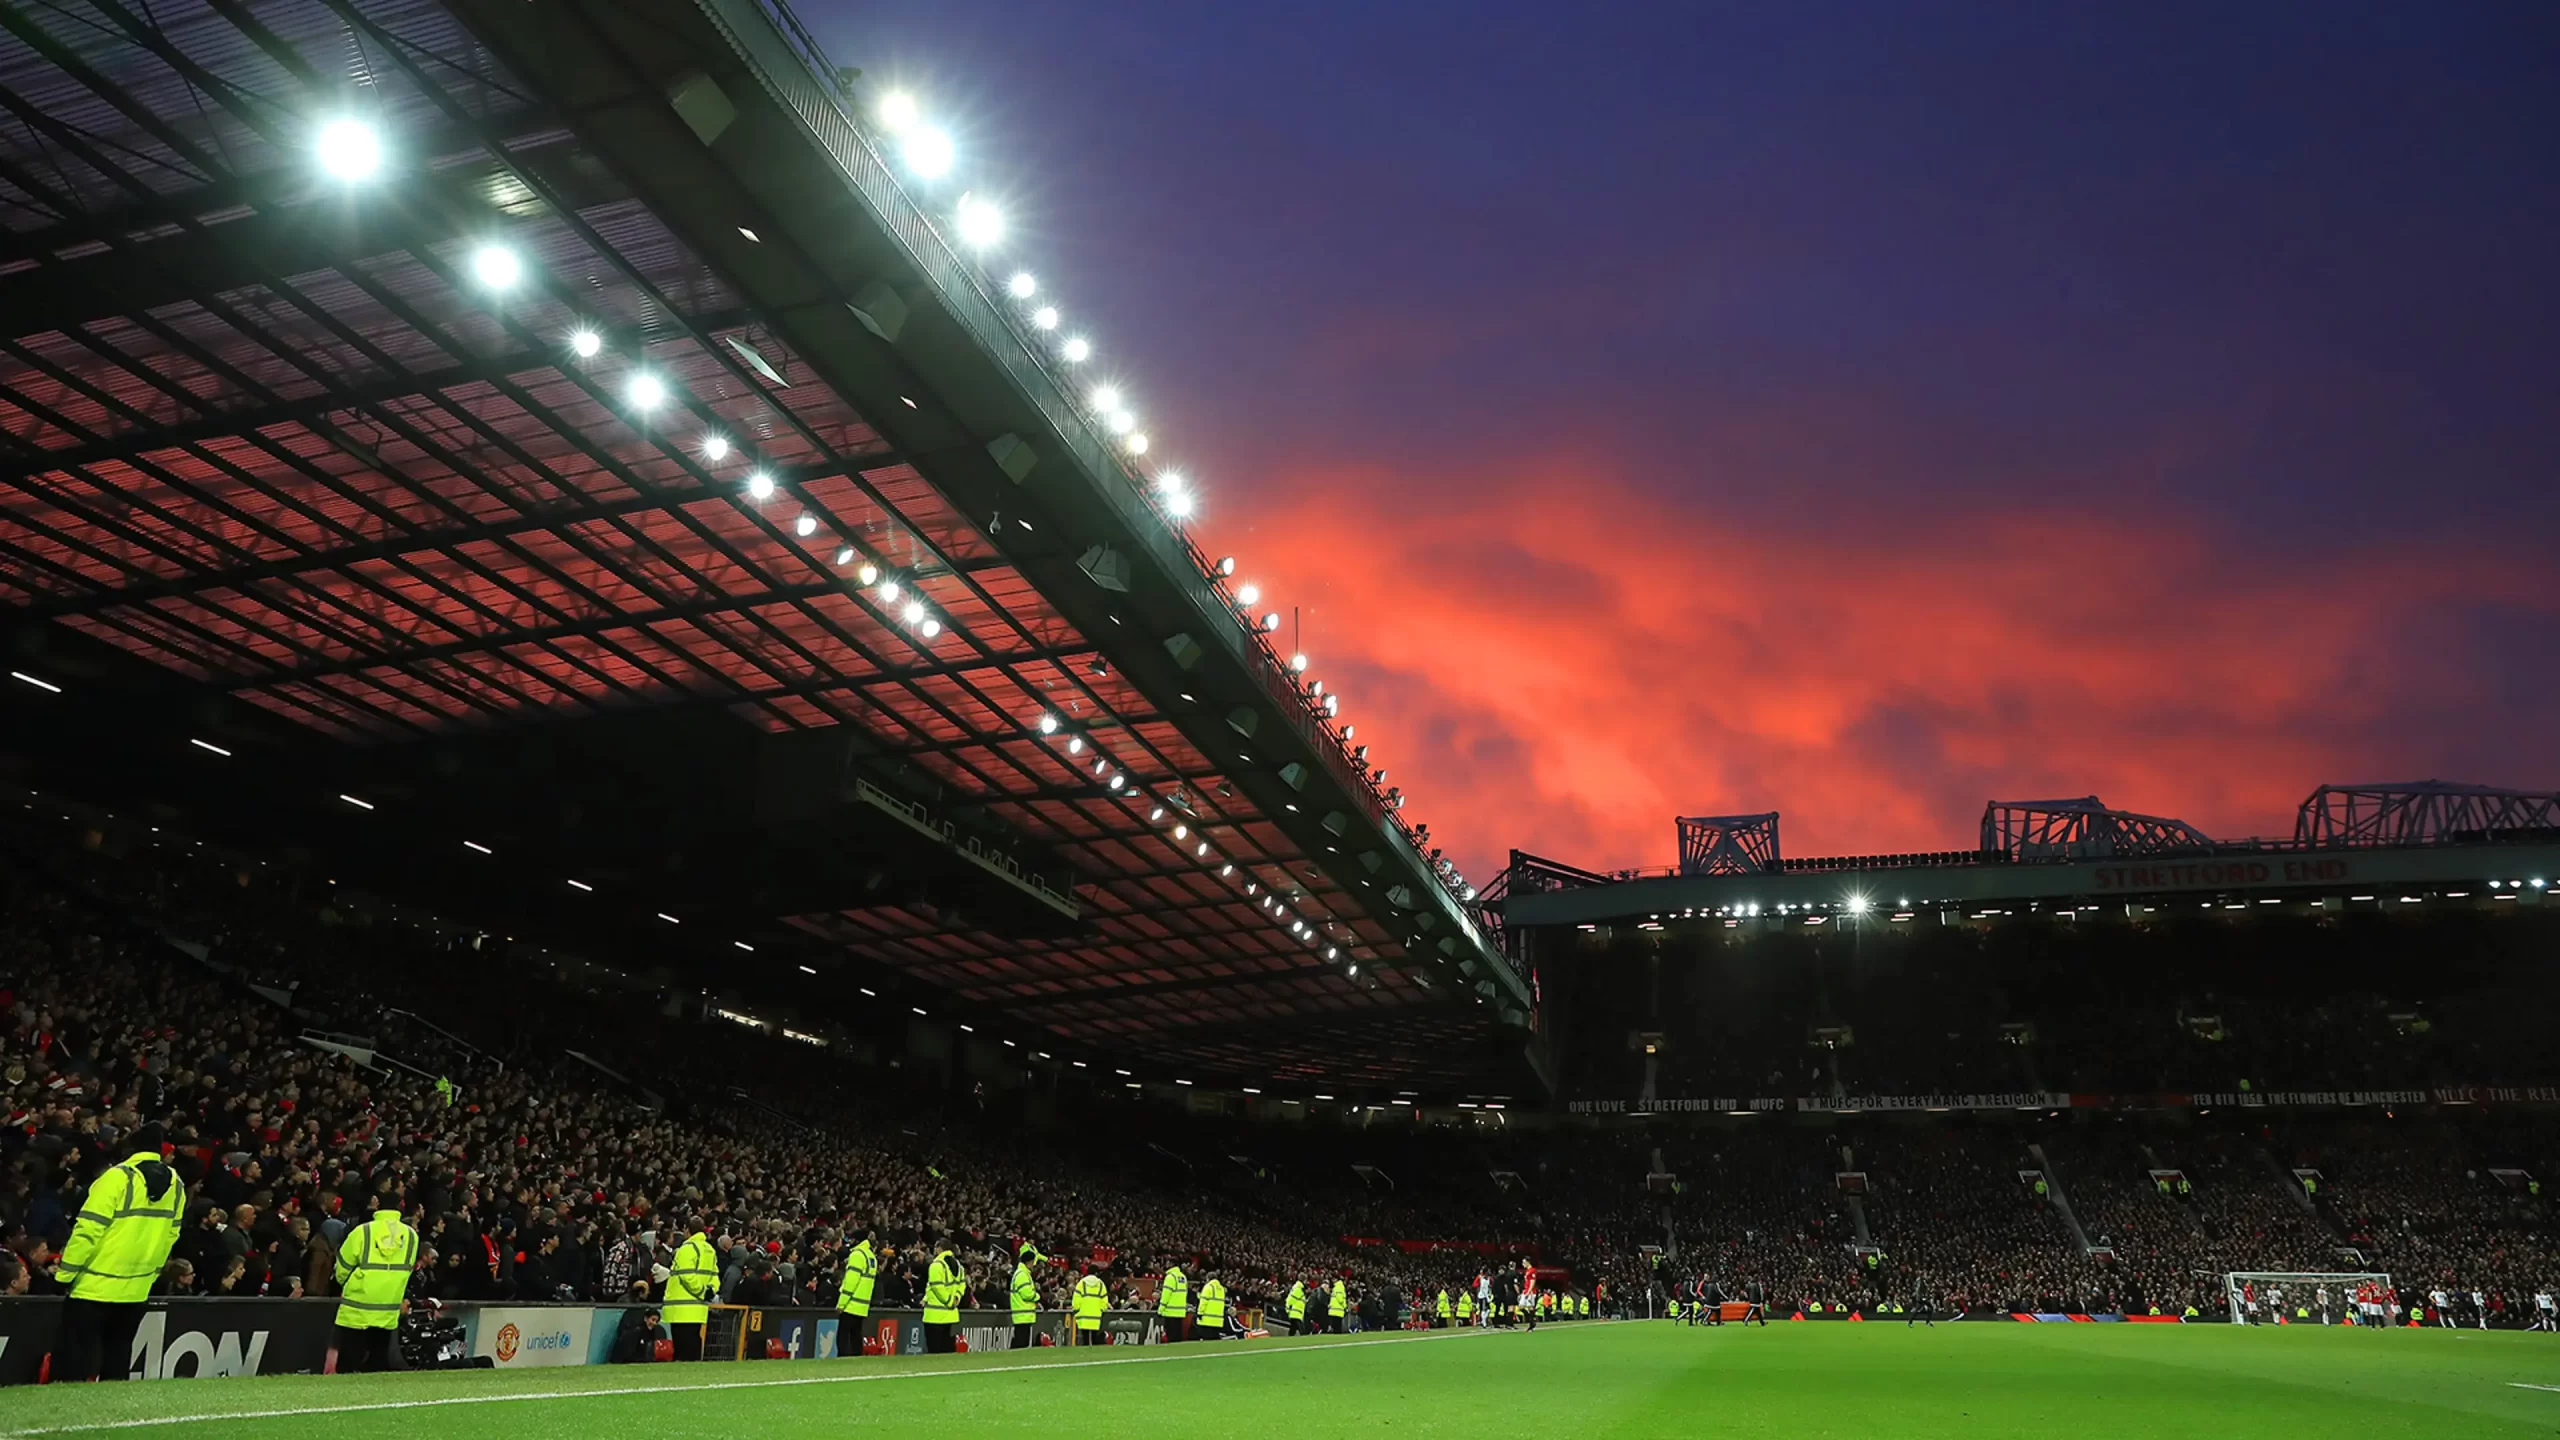 Manchester United one step closer to demolishing Old Trafford